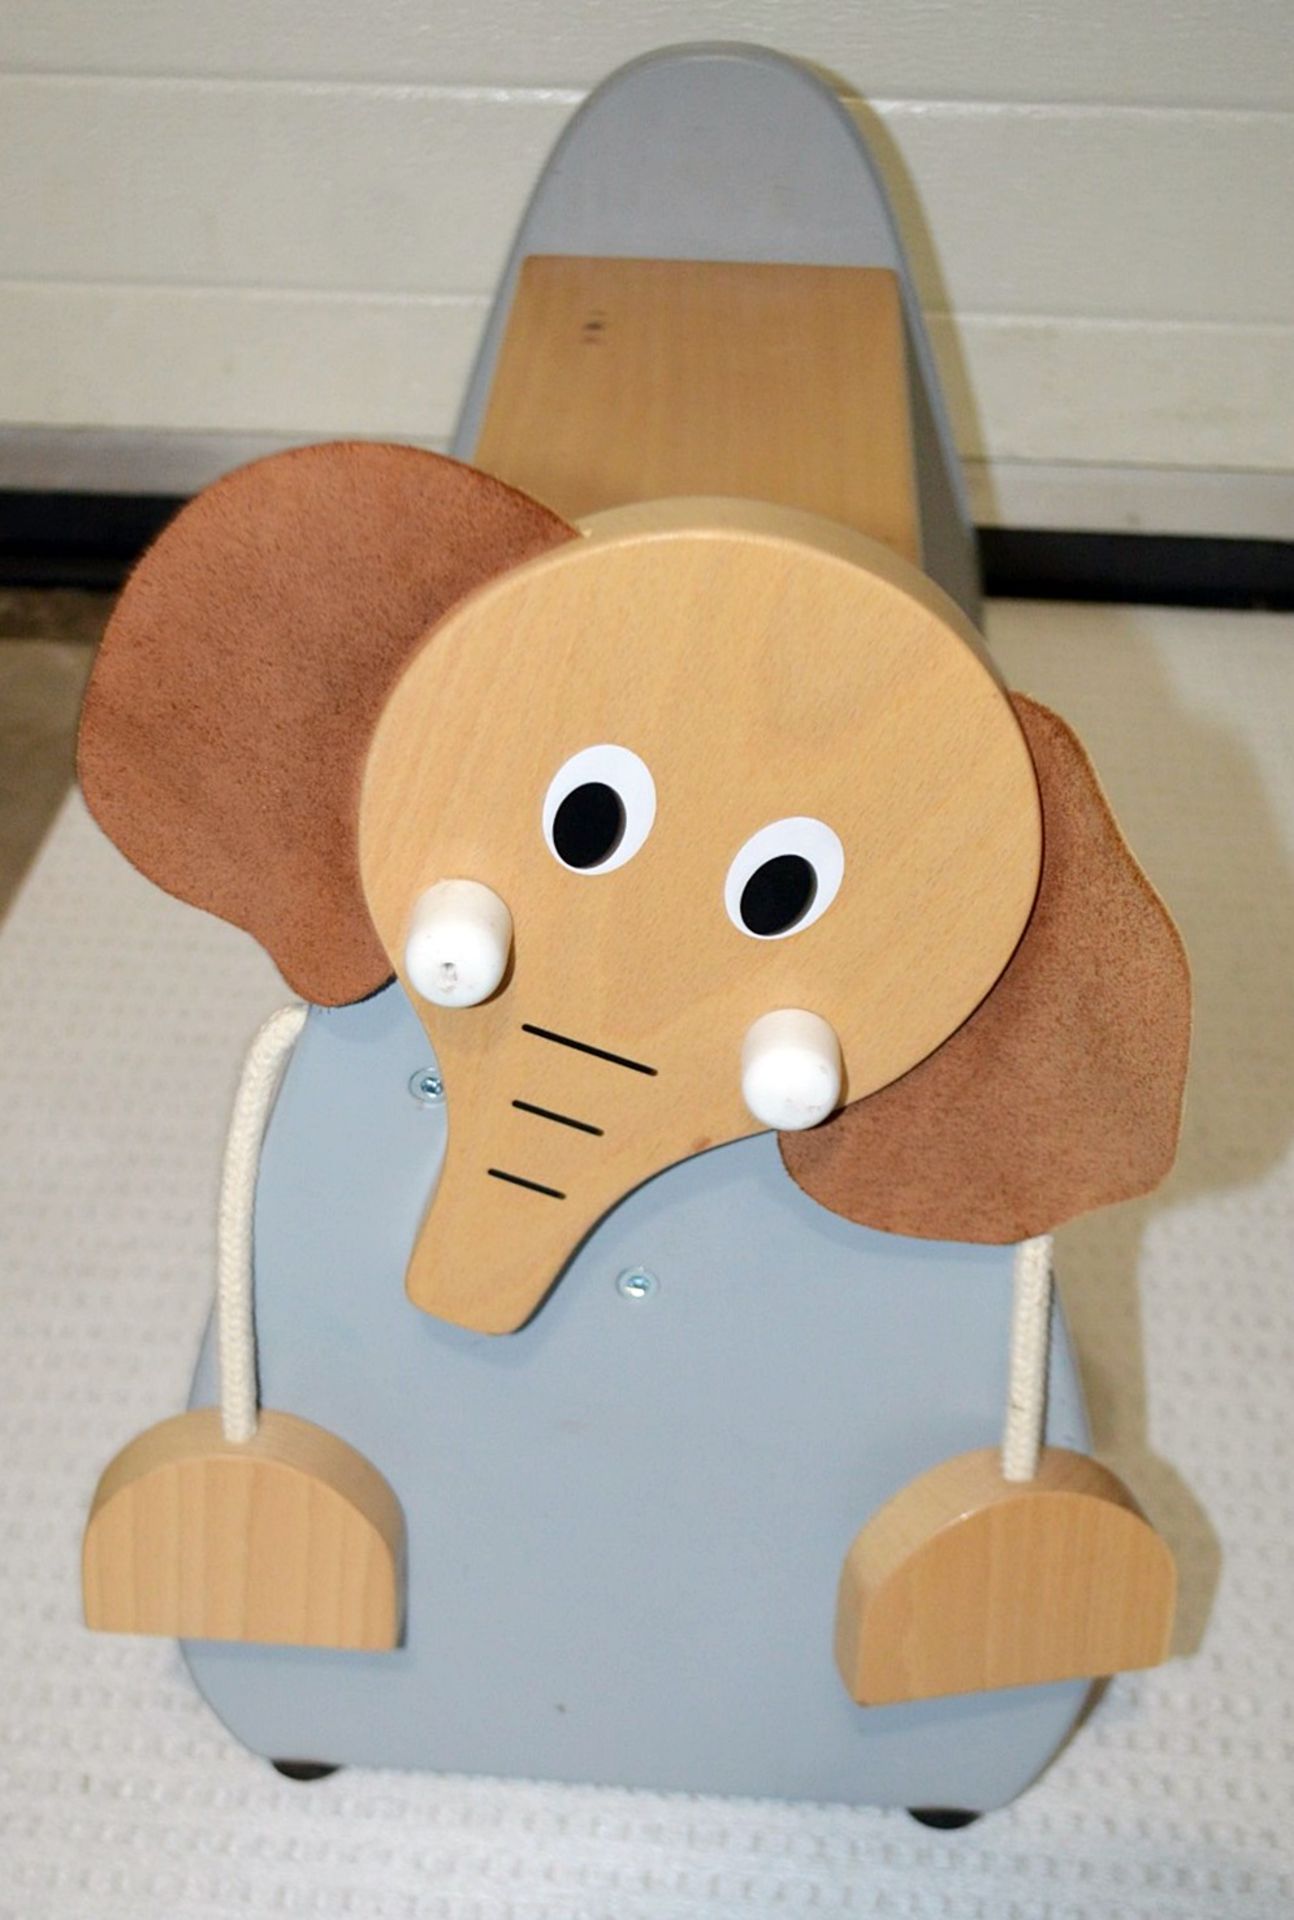 1 x Child's Solid Wood Stool / Shoe Step In The Style Of An Elephant With Real Leather Ears - A Very